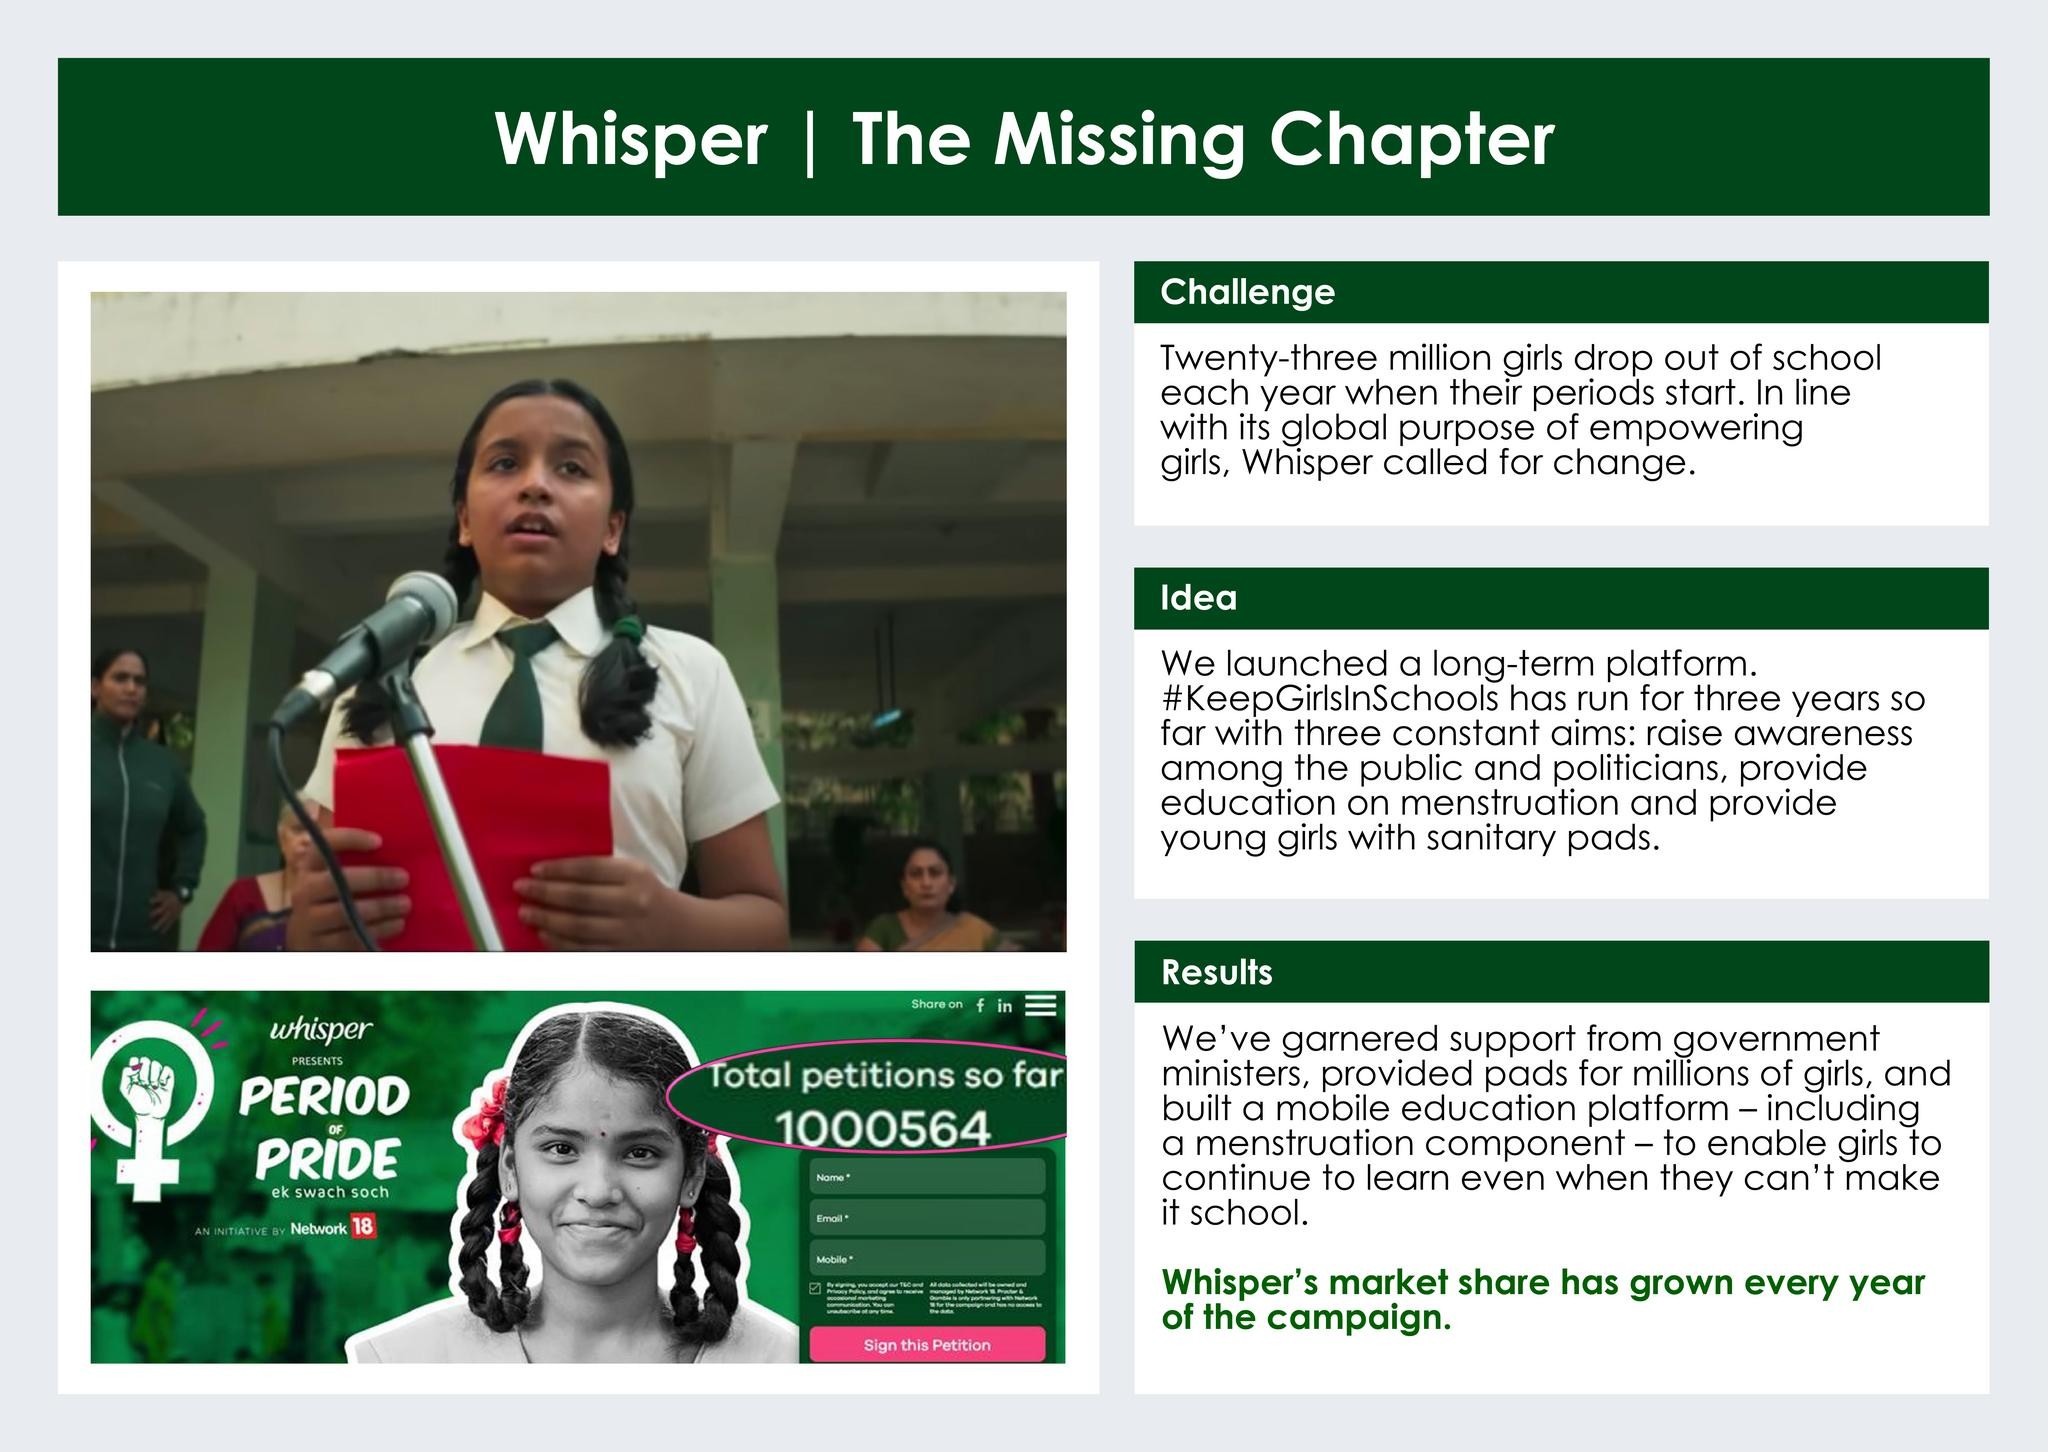 THE MISSING CHAPTER